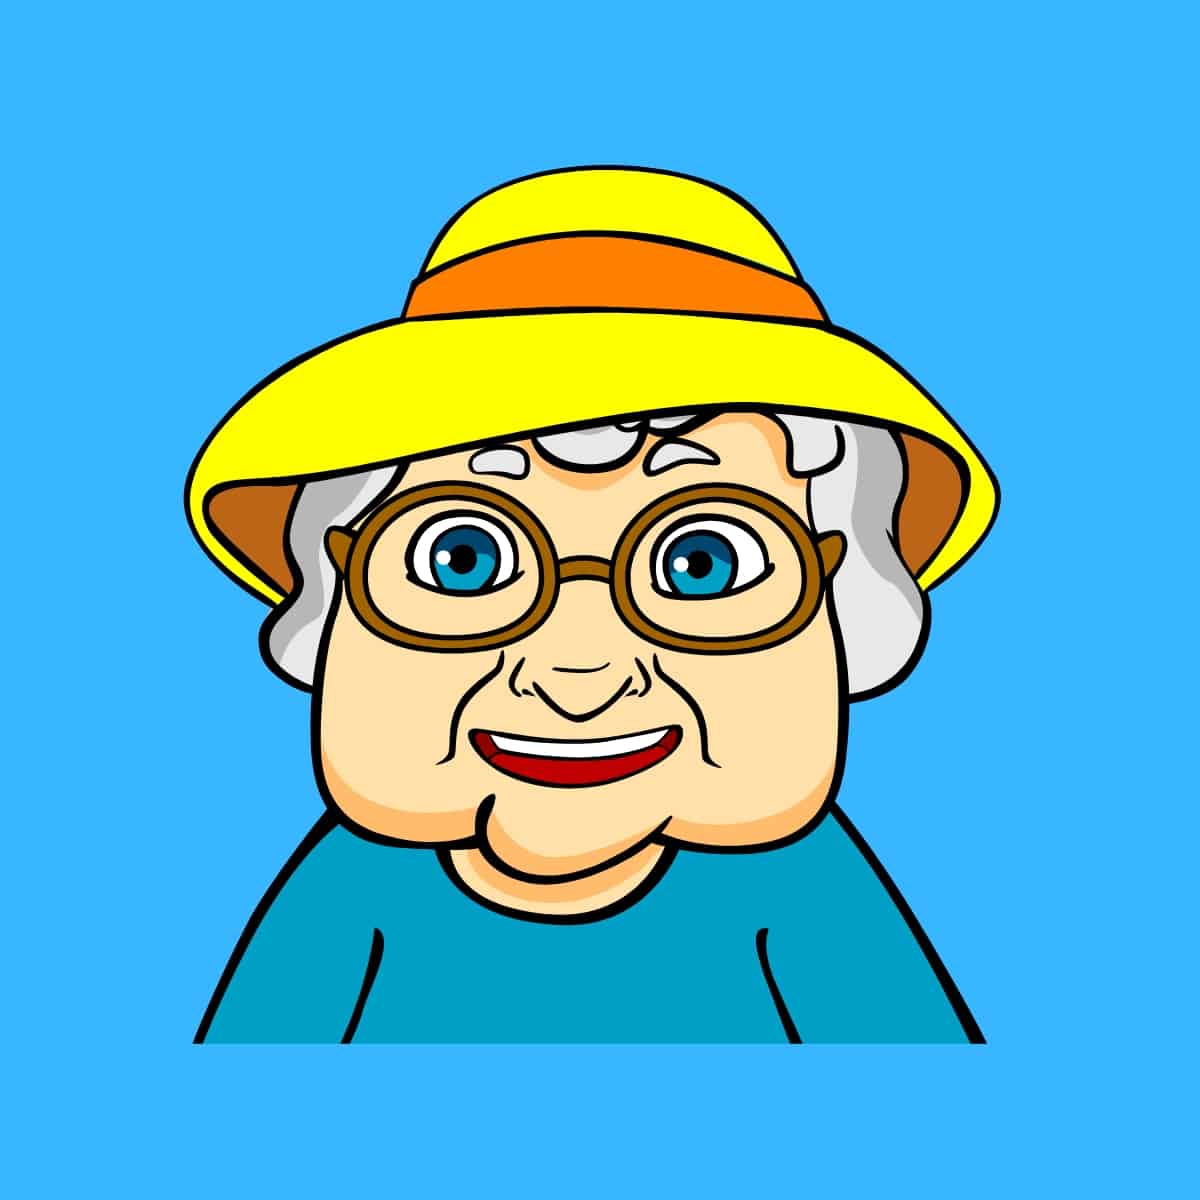 Cartoon graphic of a grandma with a yellow hat smiling on a blue background.